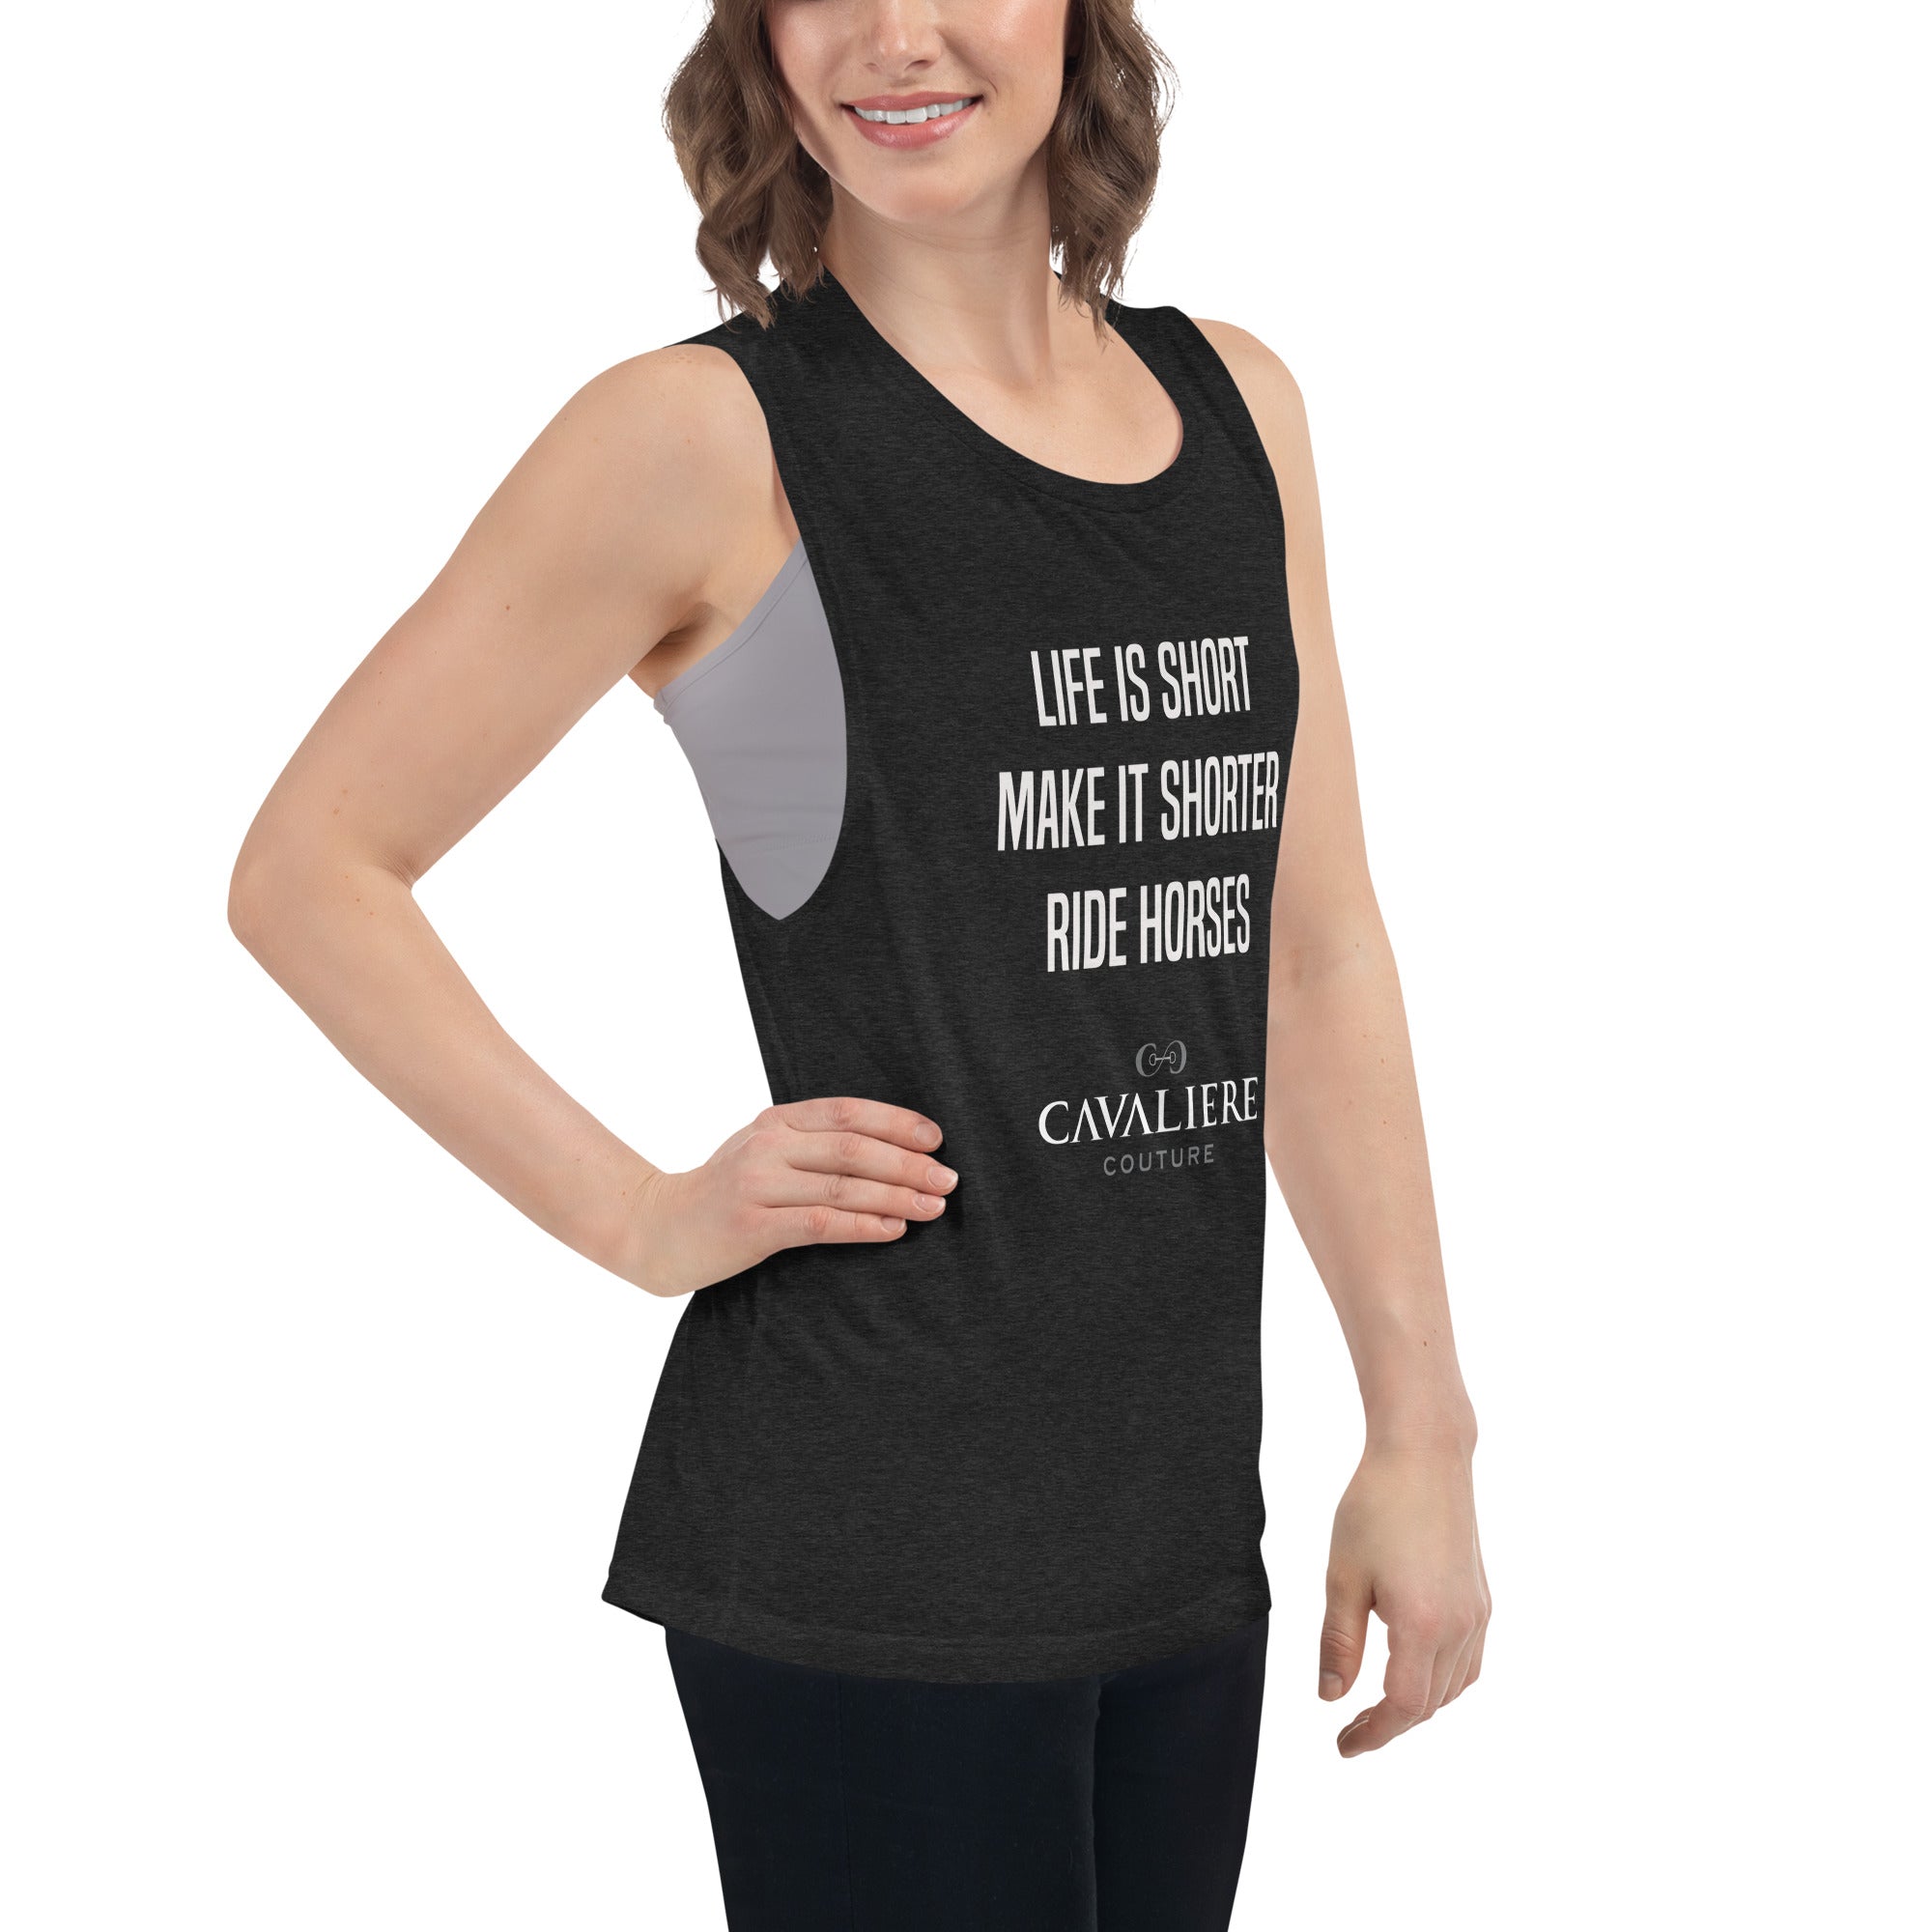 Life Is Short Muscle Tank